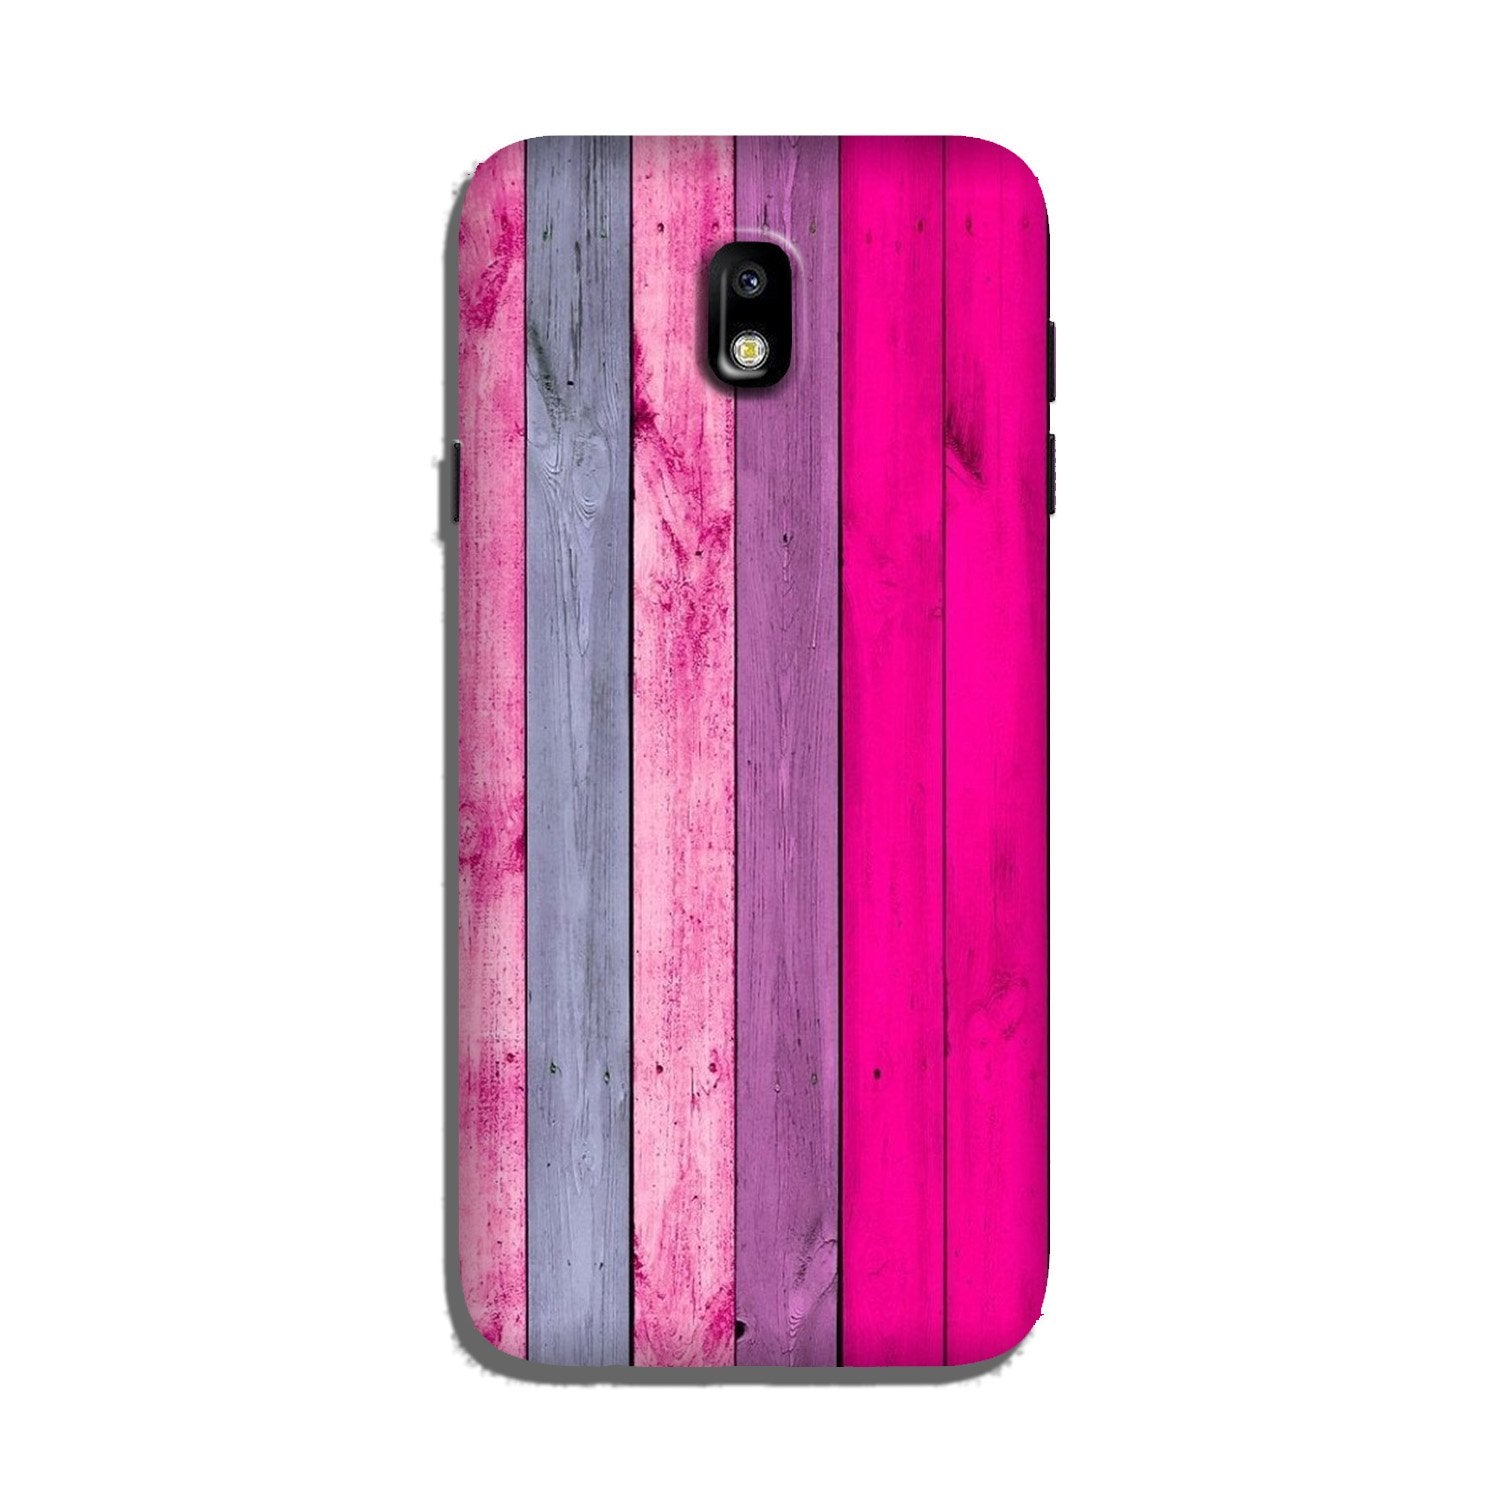 Wooden look Case for Galaxy J7 Pro